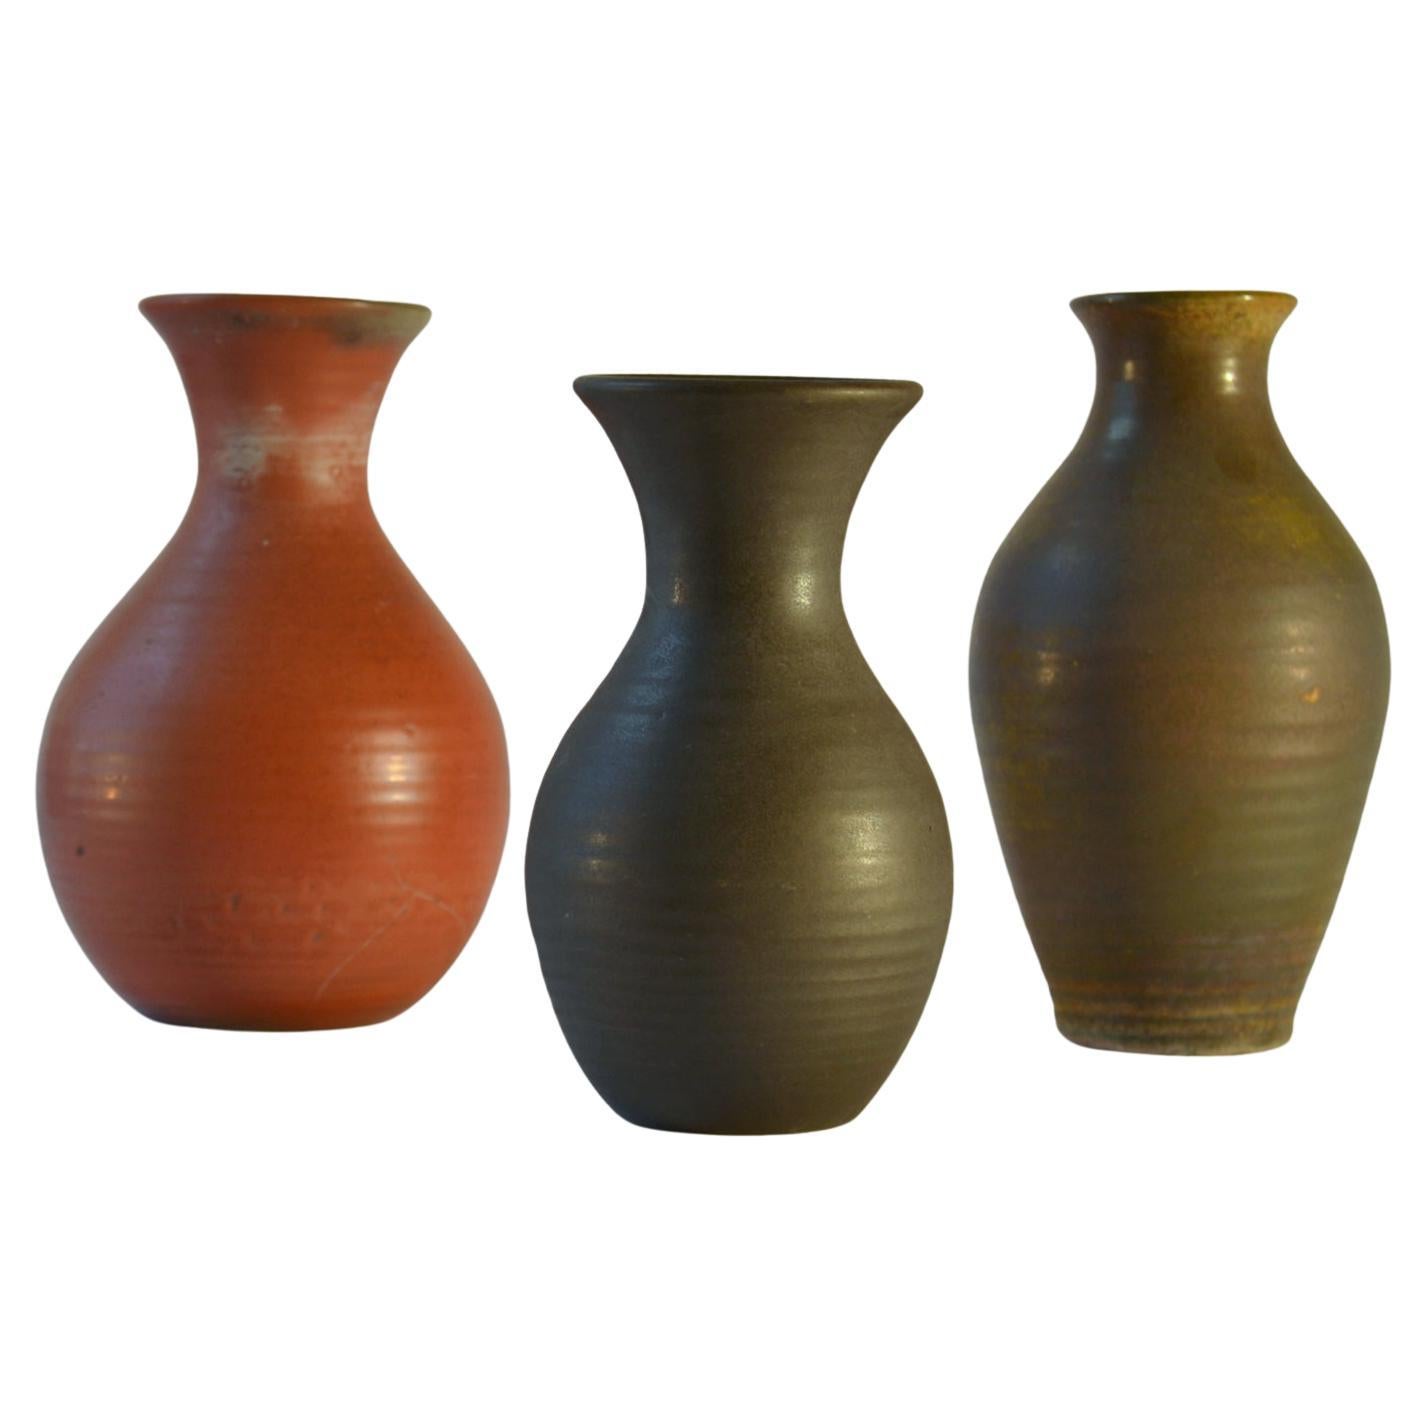 Three Studio Pottery vases in coral red, mat black and moss green are created on the turning wheel by highly technical skilled Dutch ceramist in the 1960s, made by De Olde Kuyk (DOK) Milsbeek, The Netherlands. The glazes in colours and textures from